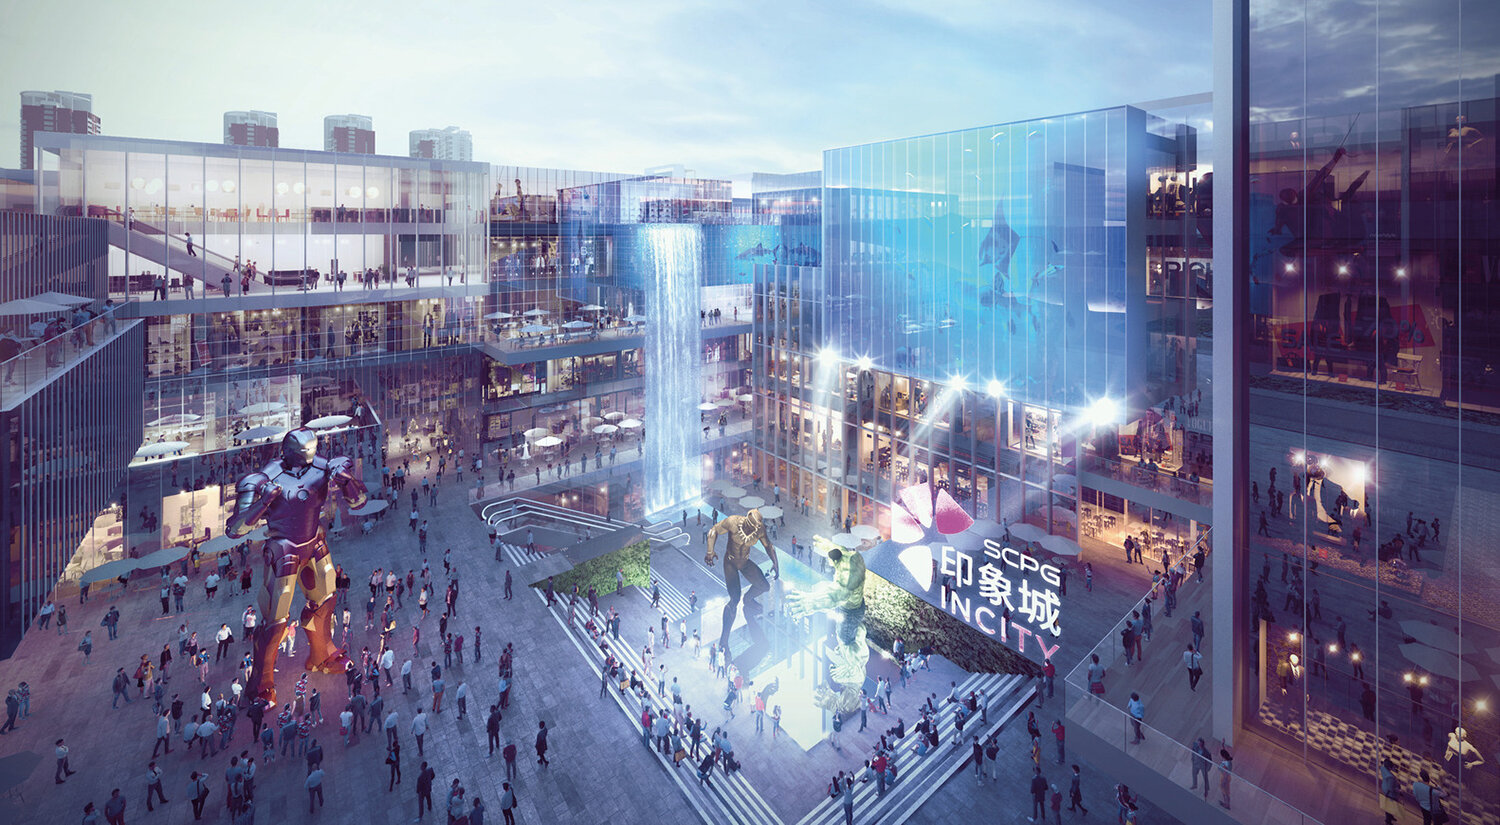 Architectural planning and design of Impression City Shopping Center